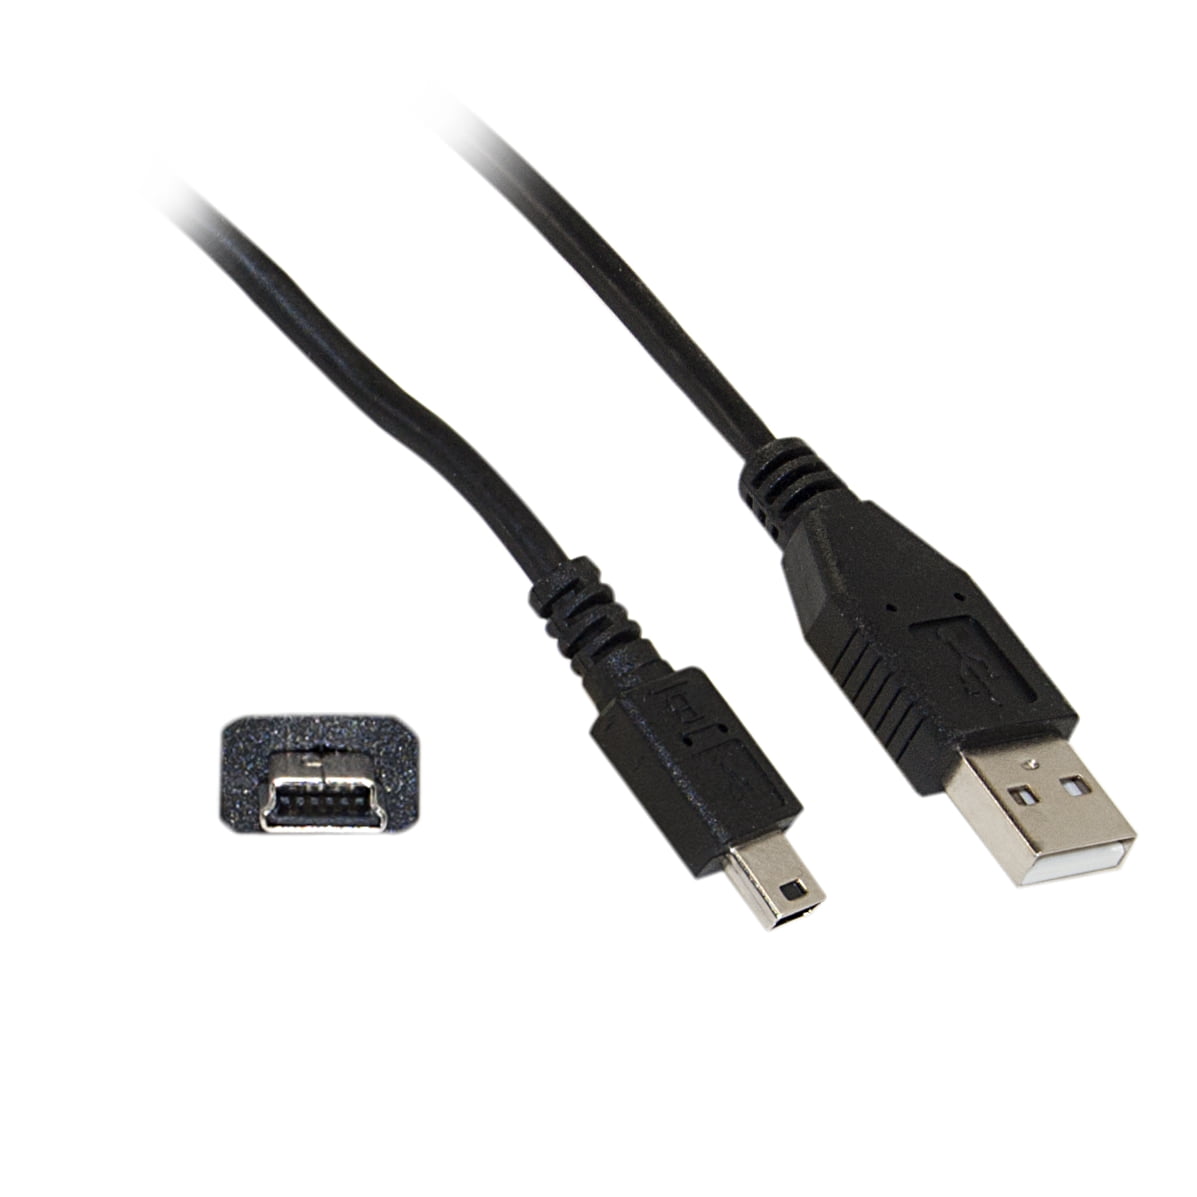 USB 2.0 Printer/Device Cable Black GOWOS 1 Feet Type A Male to Type B Male 2 Pack 